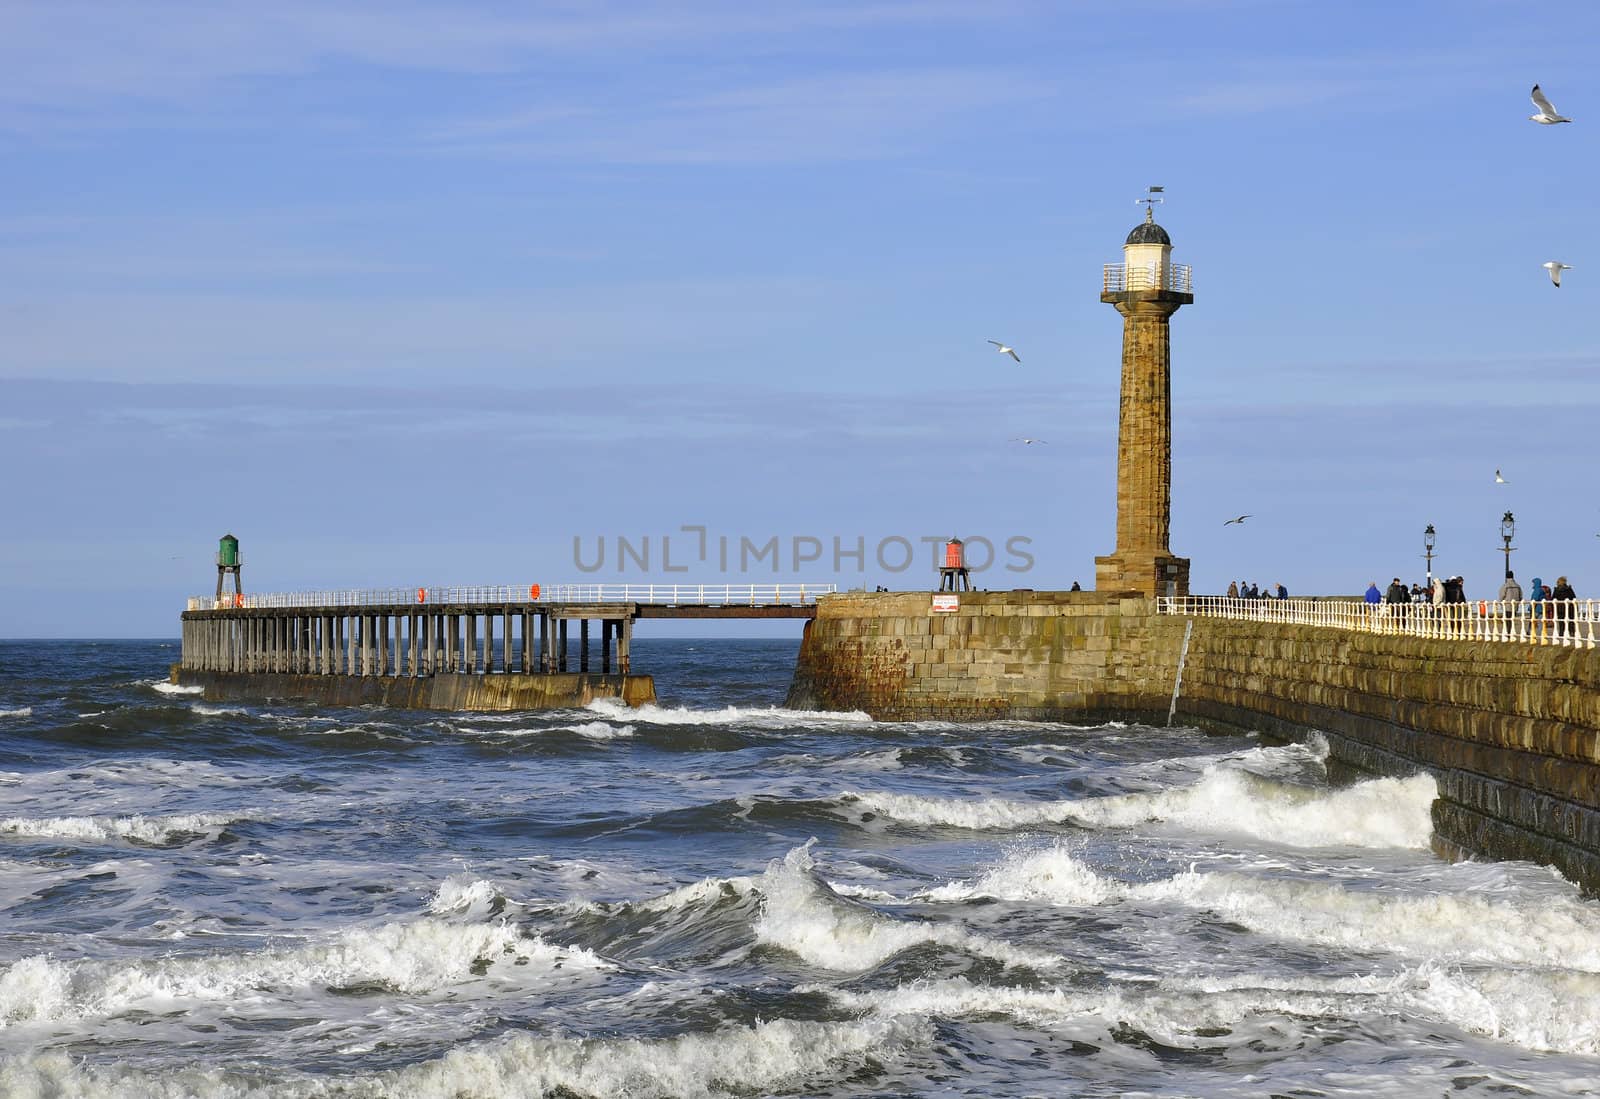 Postcard view of Whitby pier and lighthouse